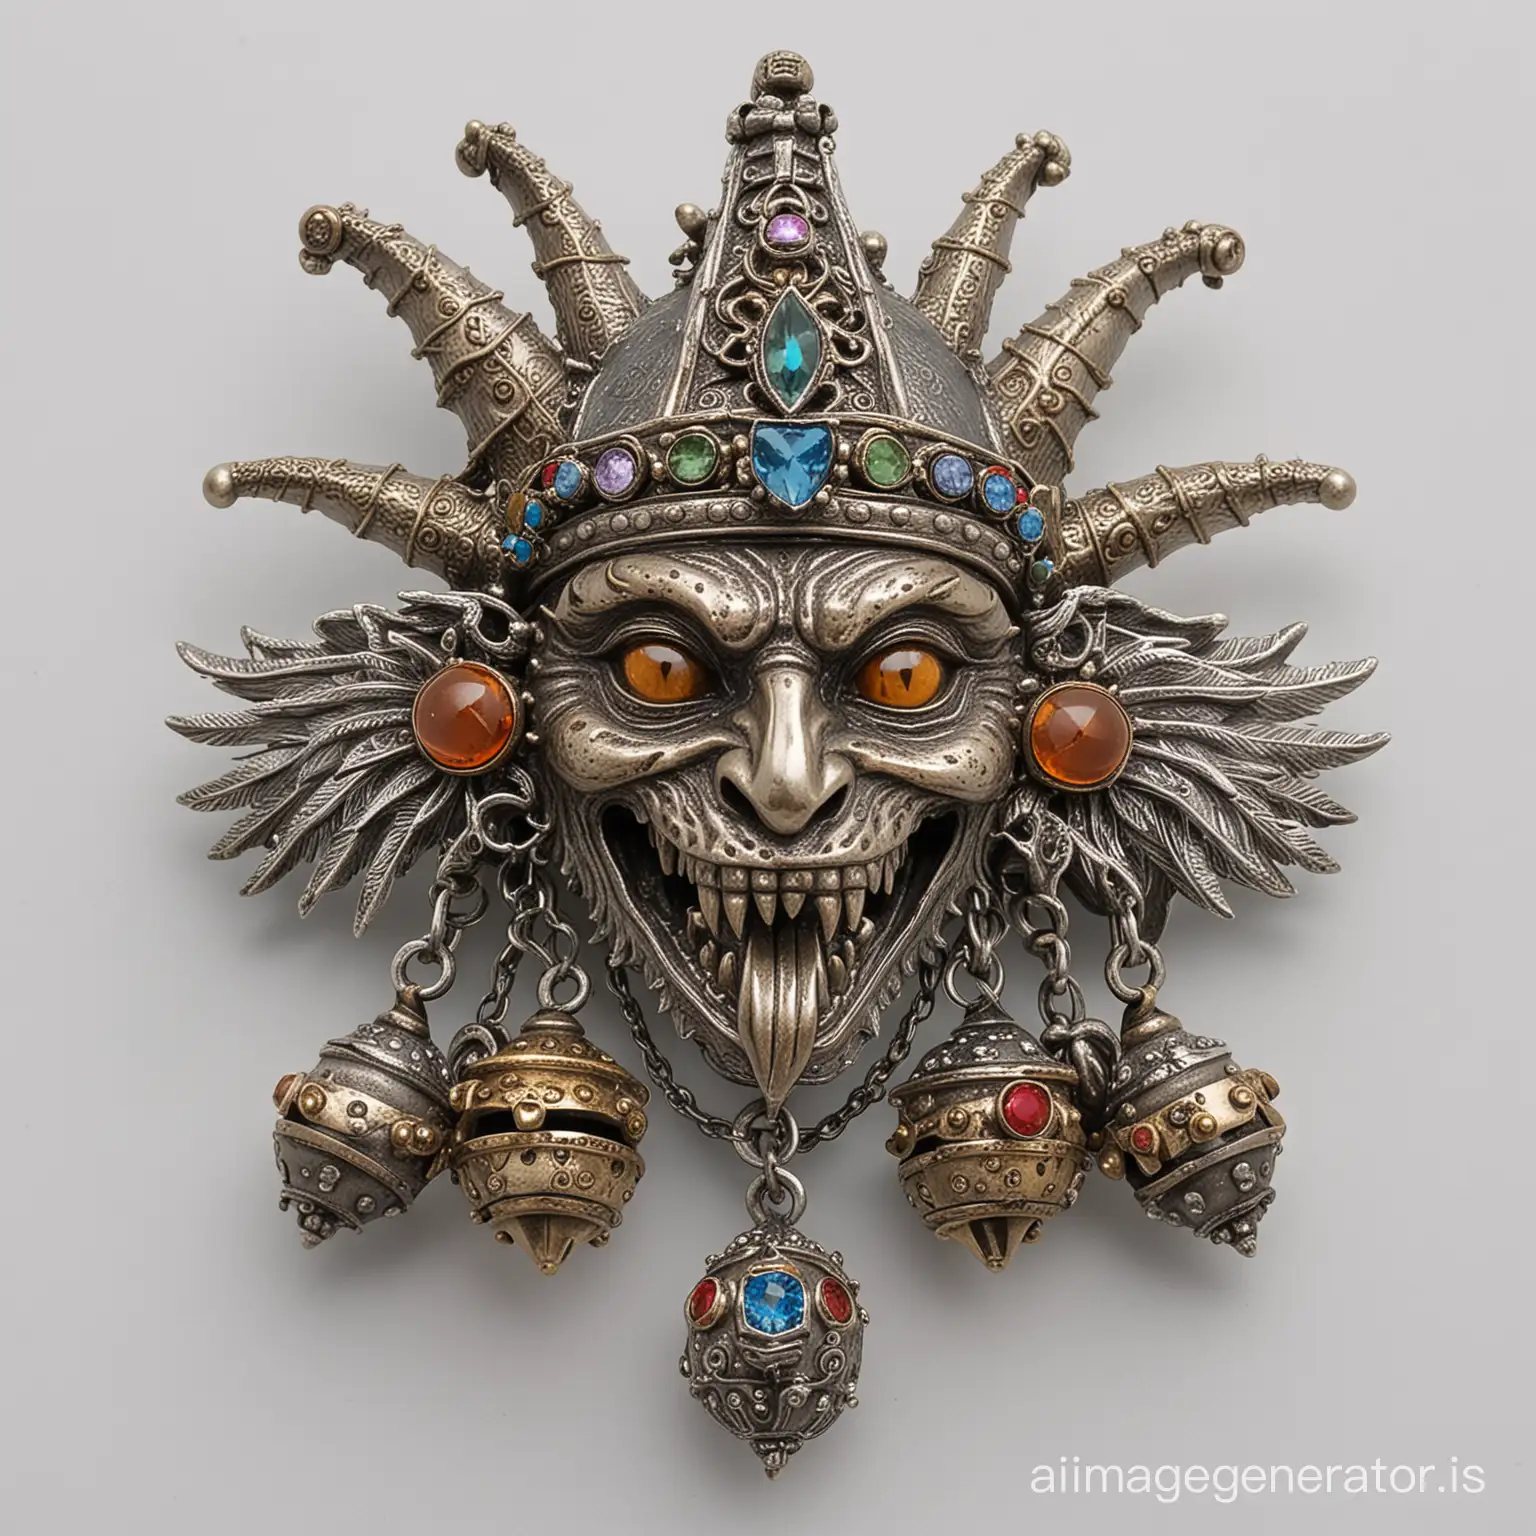 Medieval-Dragon-Jester-Brooch-with-Jeweled-Details